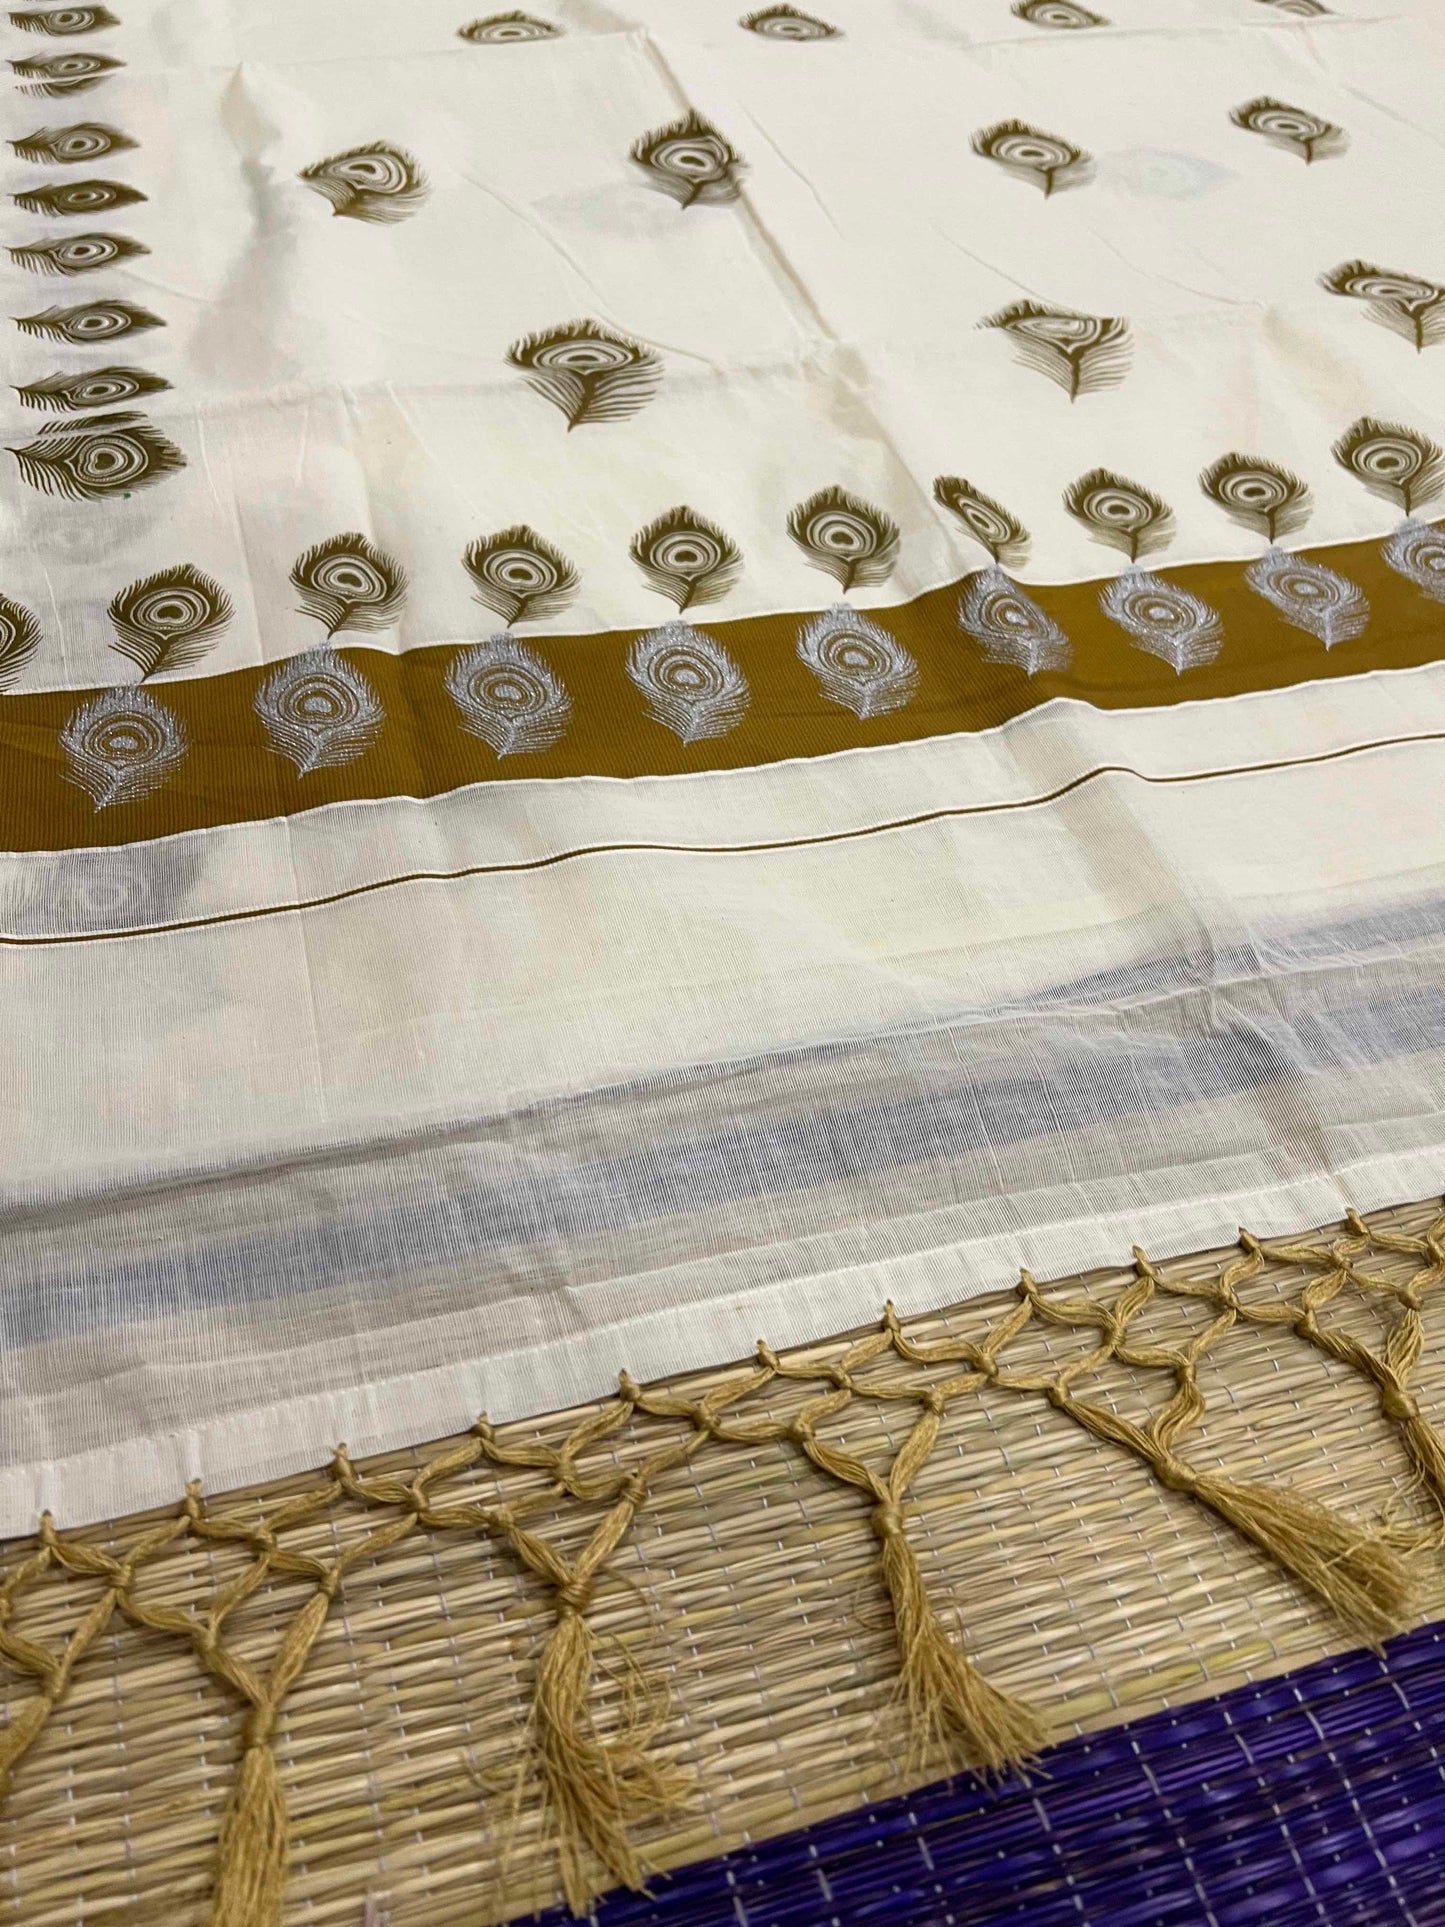 Off White Pure Cotton Kerala Saree with Peacock Feather Block Prints on Olive Border and Tassels on Pallu